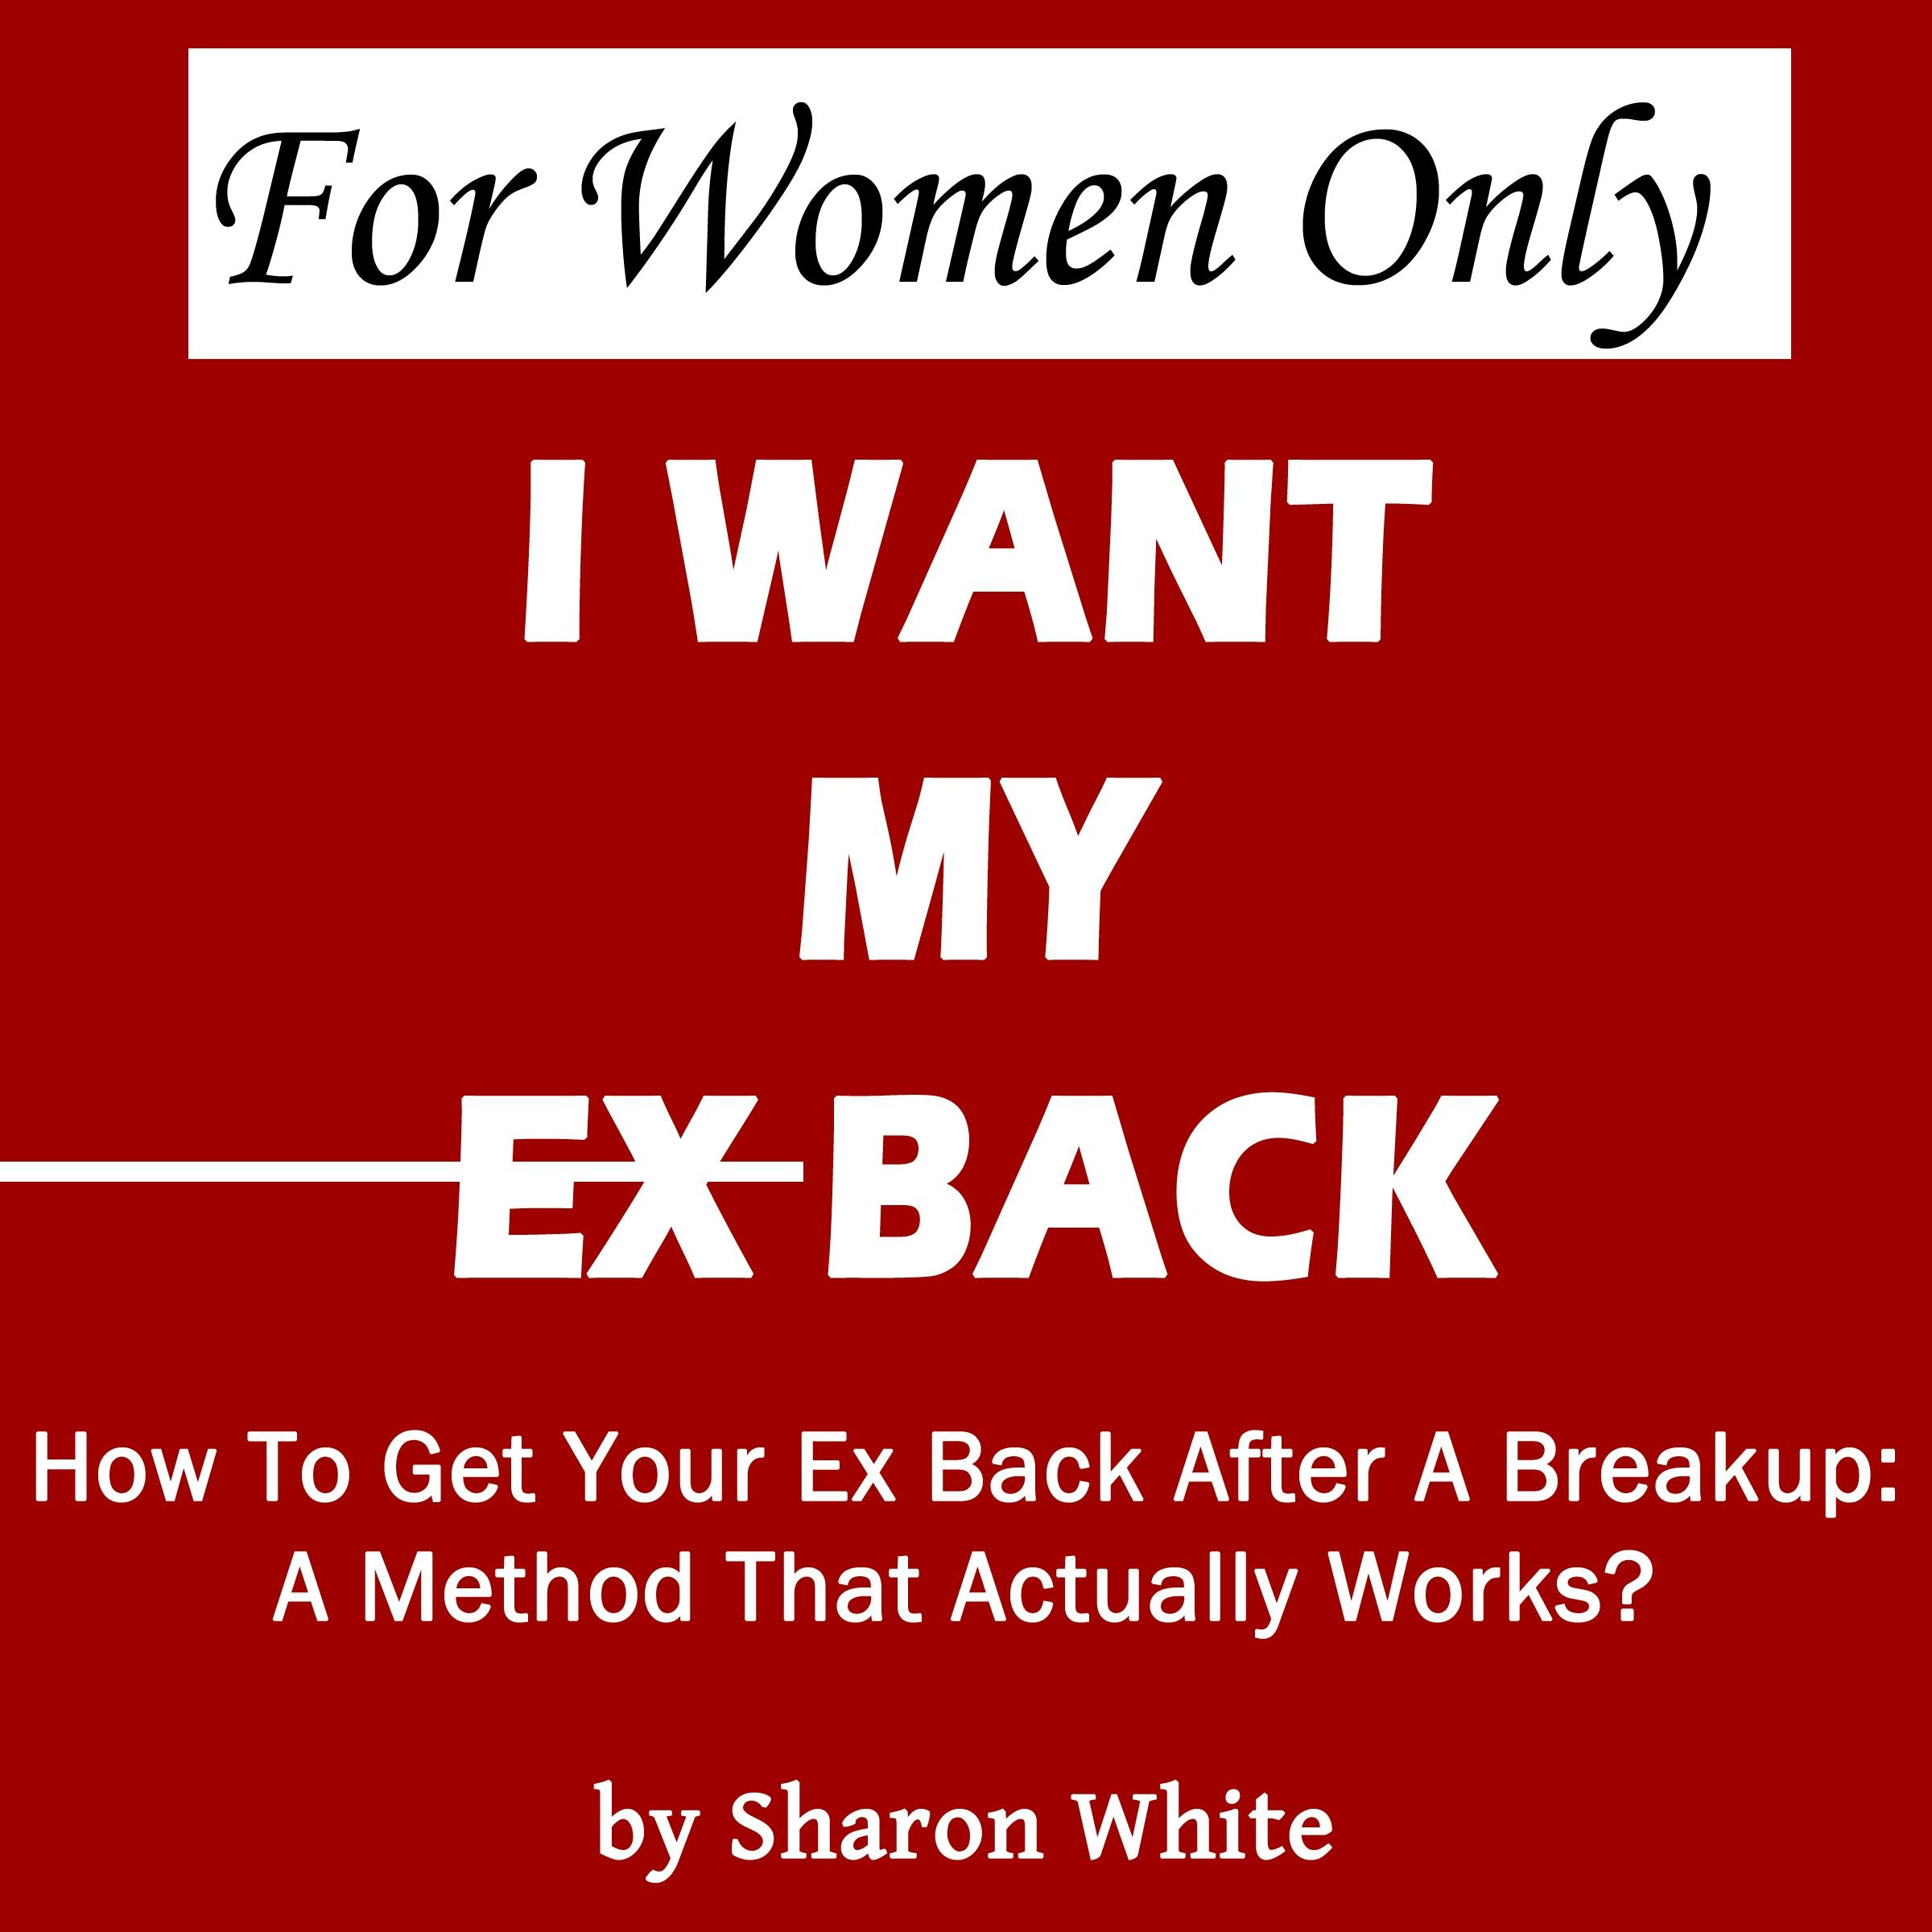 For Women Only - I Want My Ex Back: How To Get Your Ex Back After A Breakup: A Method That Actually Works - Sharon White